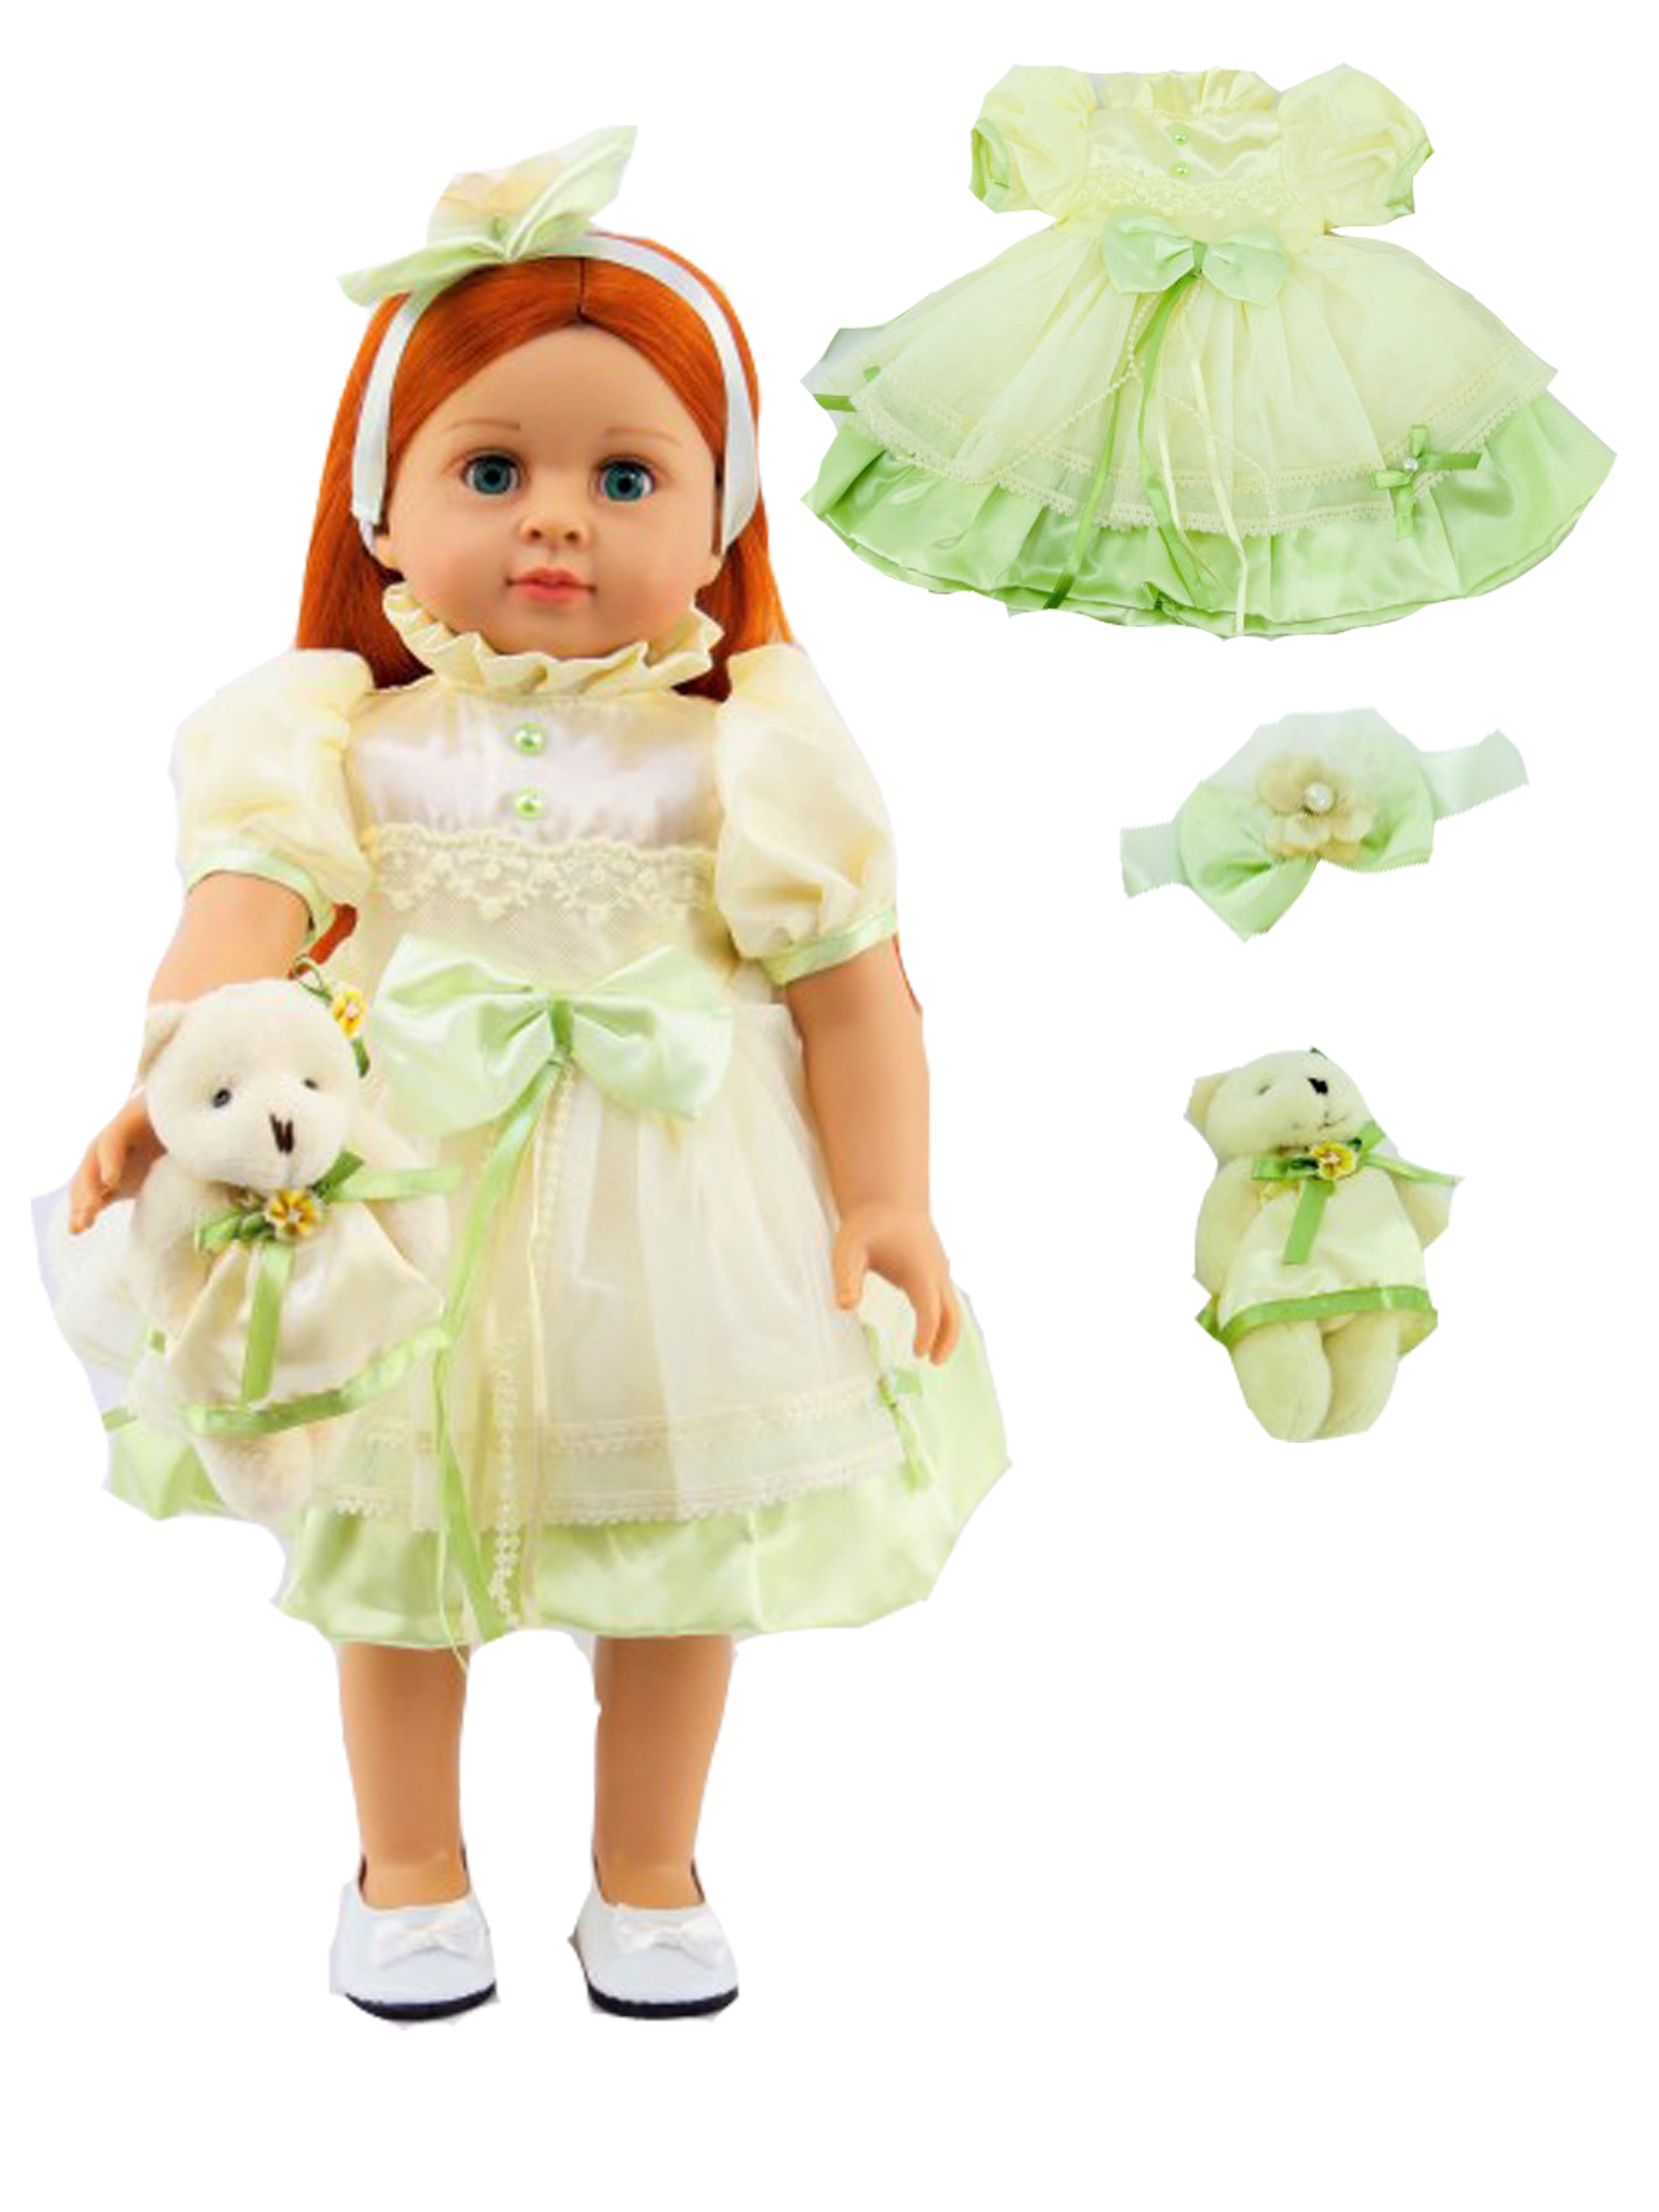 AMERICAN GIRL OUR GENERATION  ELEGANT DAISY DRESS+HAIR PIN 18 INCH DOLL CLOTHES 